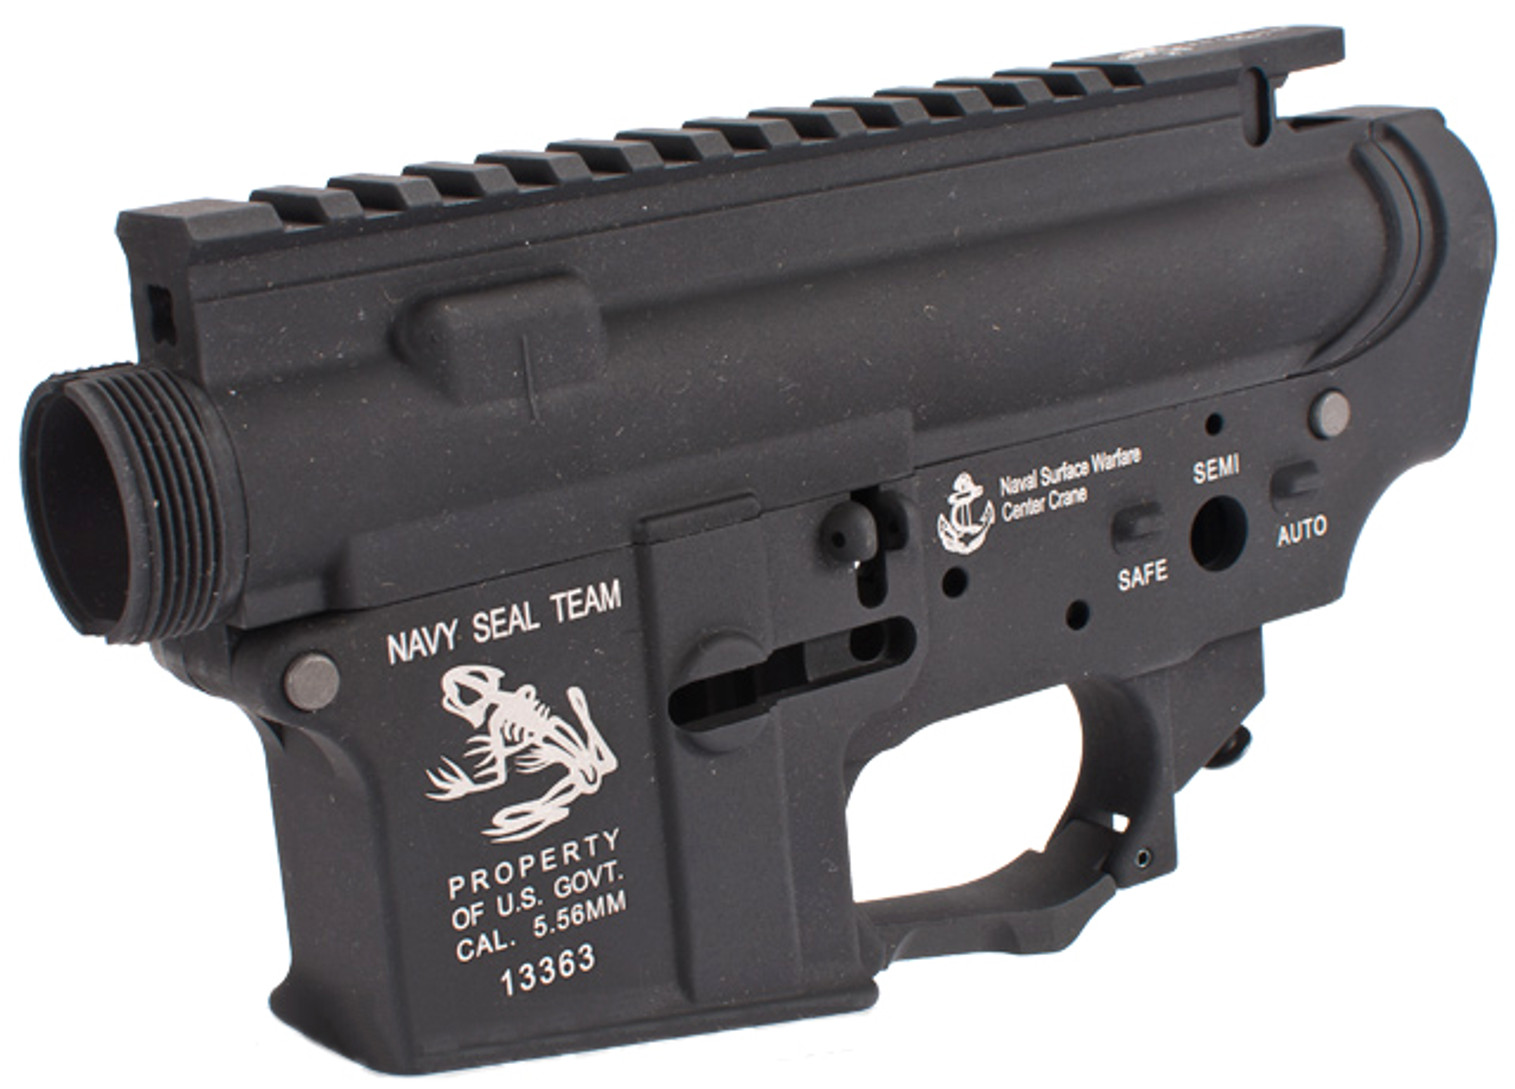 G&P Full Metal Receiver for M4  M16 Series Airsoft GBB Rifles - Navy Seal Skull Frog